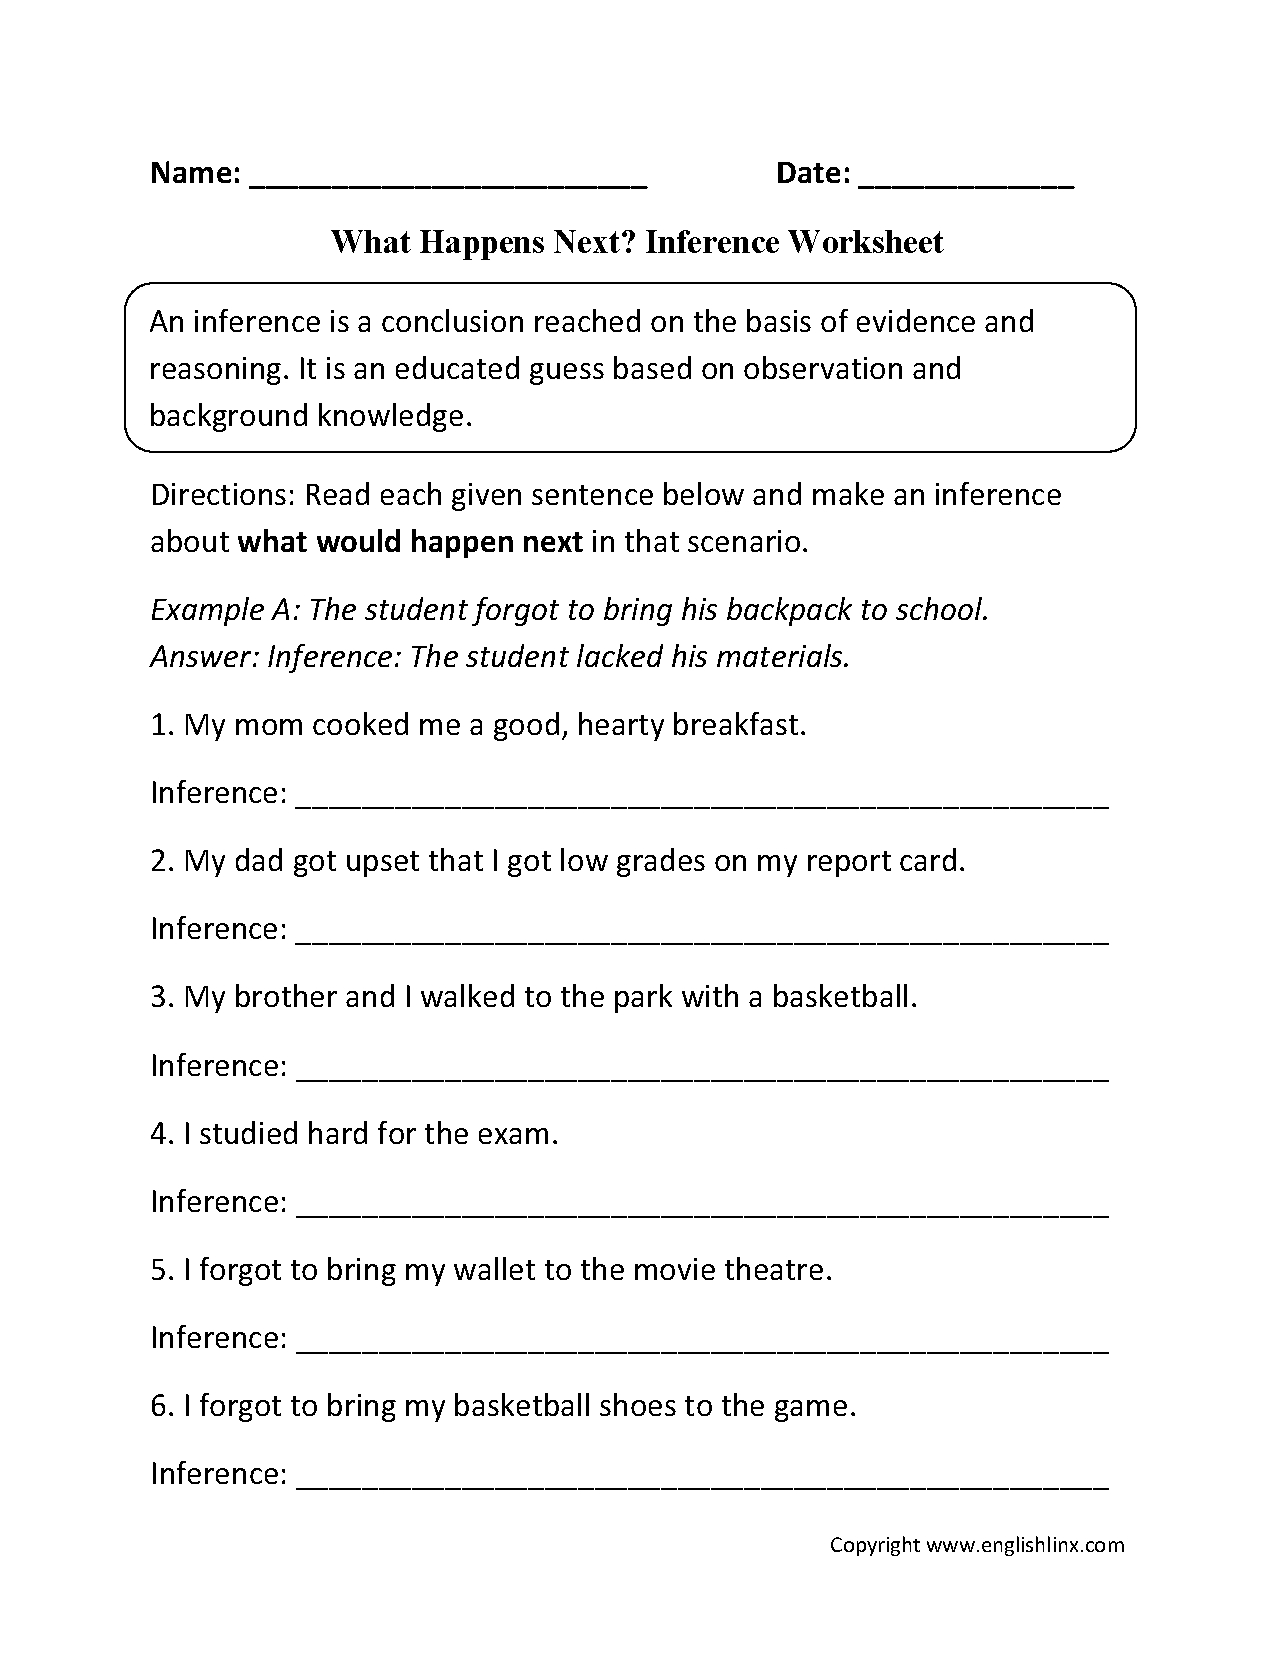 What Happens Next? Inference Worksheets | Inferring Lessons